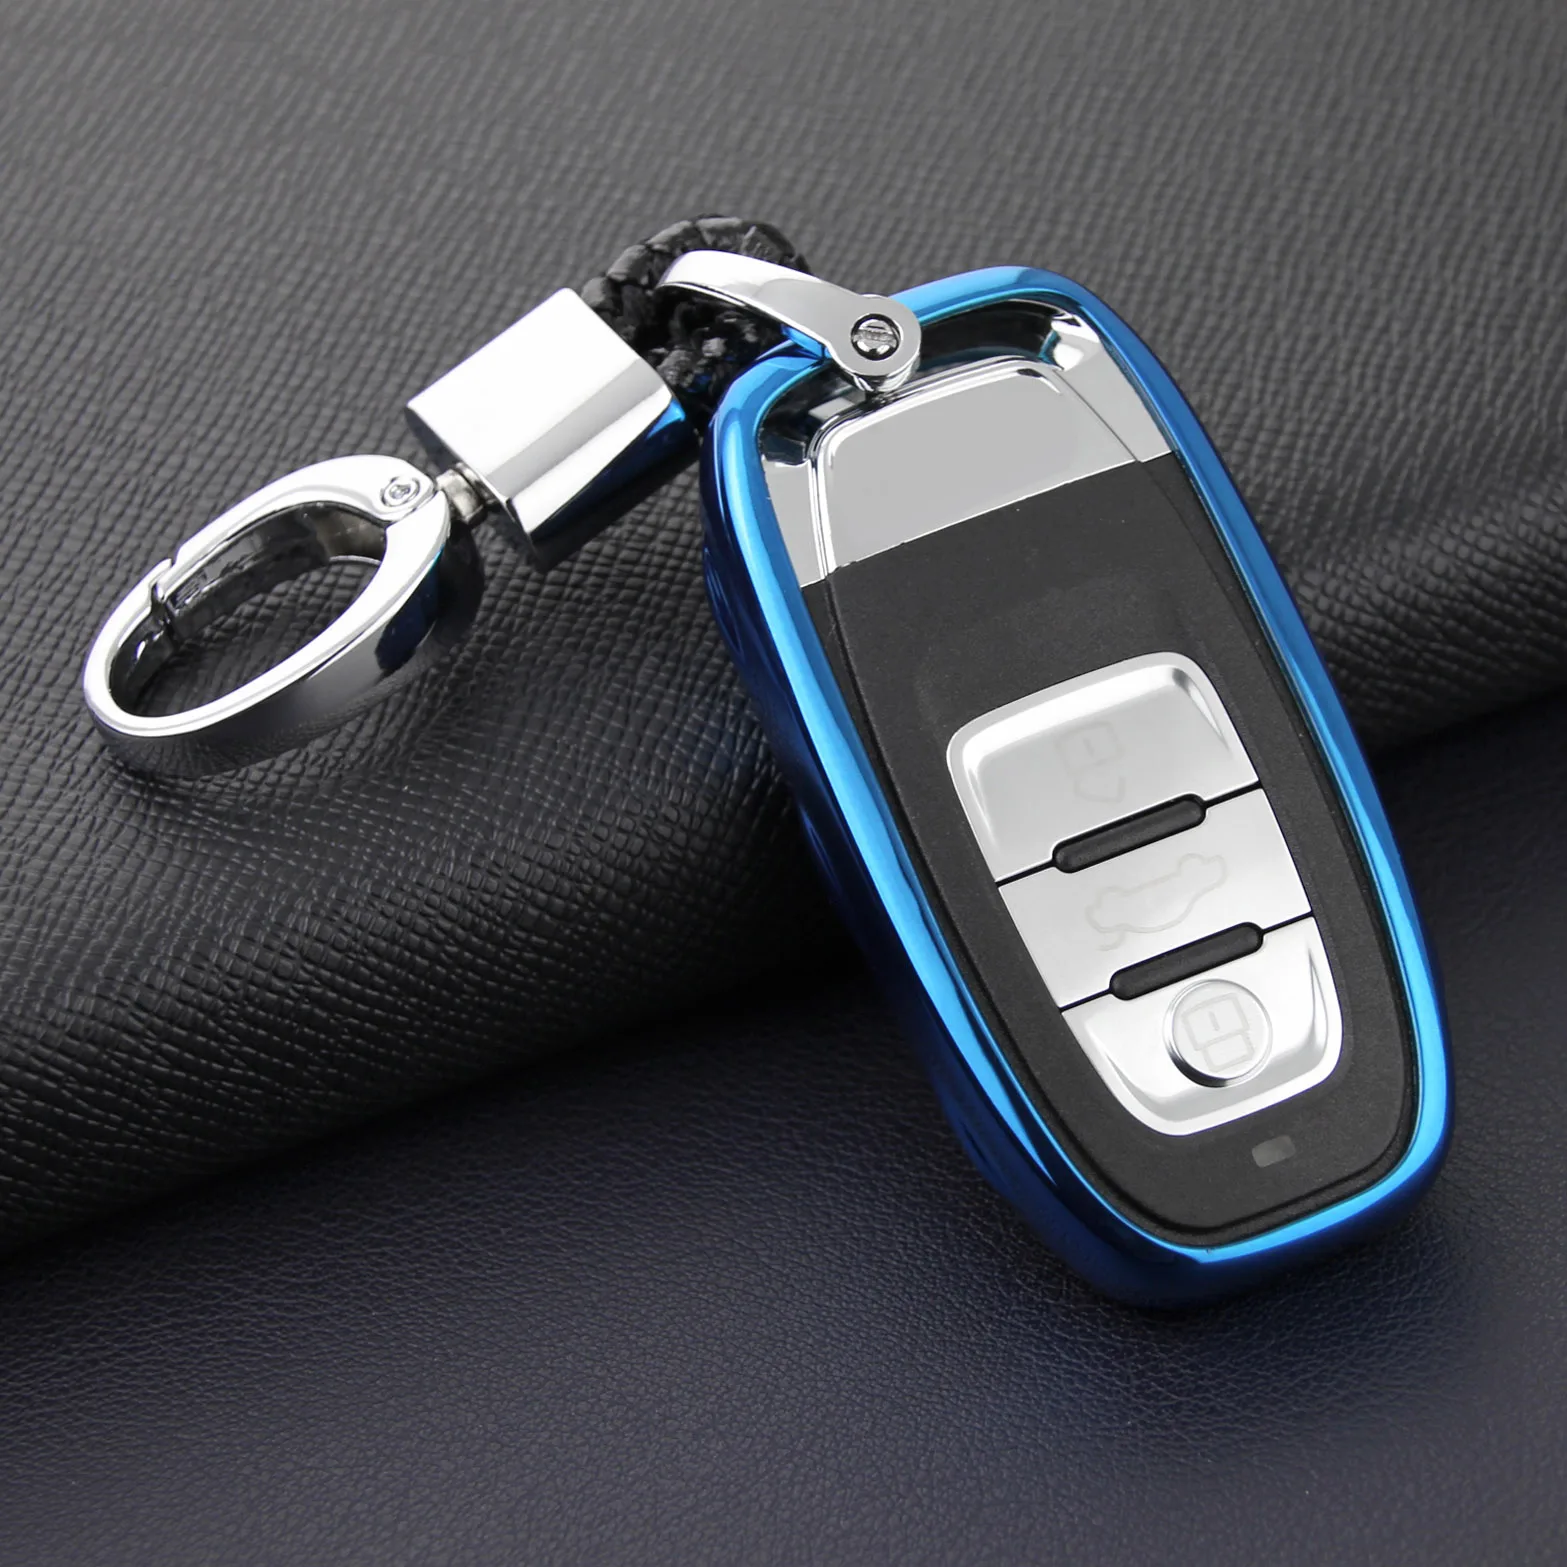 

Smart Car Key Fob Chain For Audi A4 B8 Q5 A5 A6 A7 A8 S4 S5 S6 S7 S8 SQ5 Accessories Keychain Case Cover Ring Holder Blue